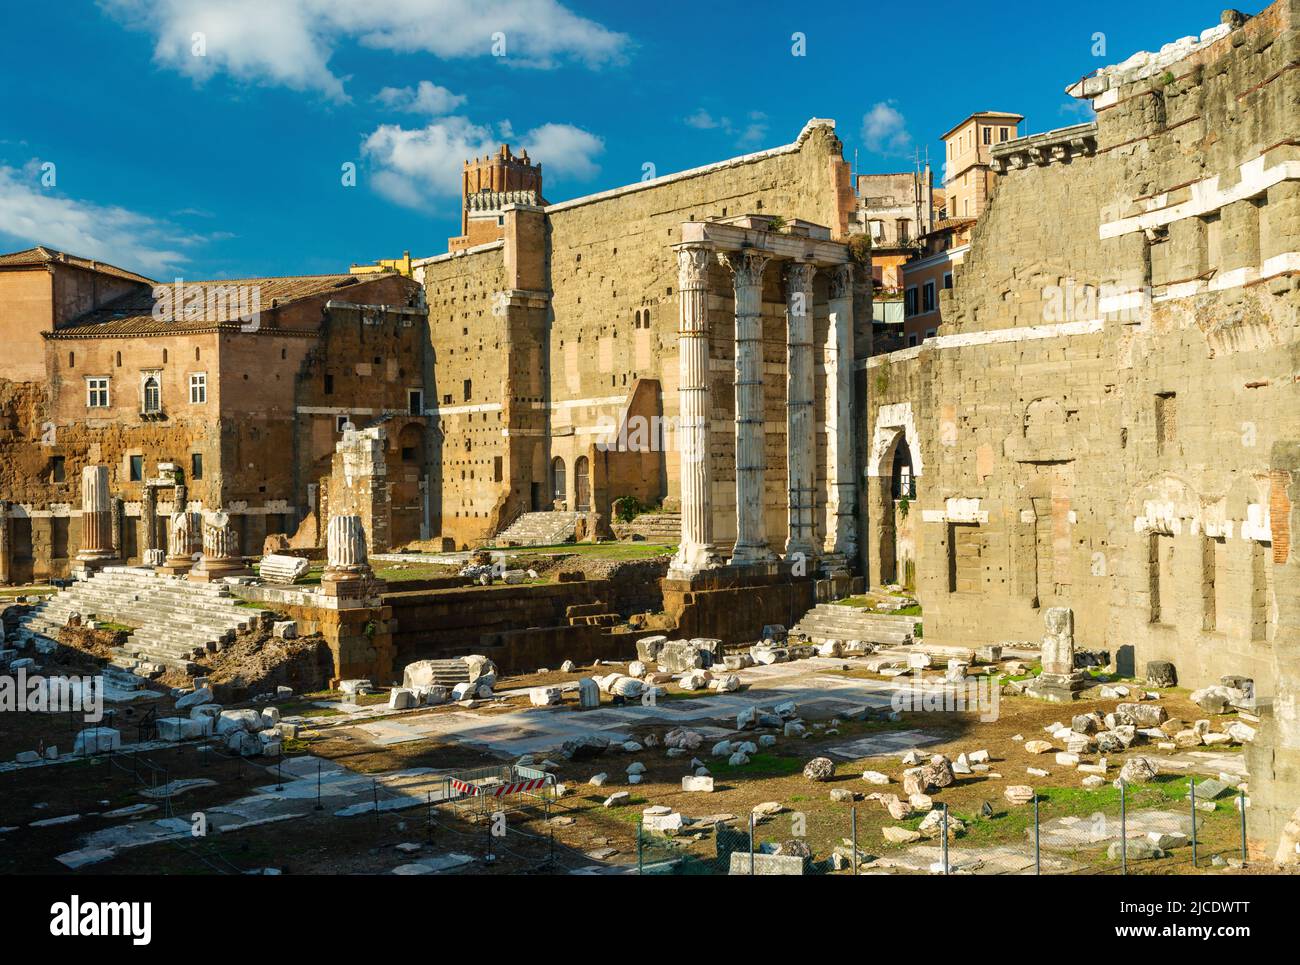 Ancient Forum of Augustus in Rome, Italy. Imperial Forums are famous historical landmarks of Rome. Scenery of ruins of Mars Ultor temple, old Roman bu Stock Photo